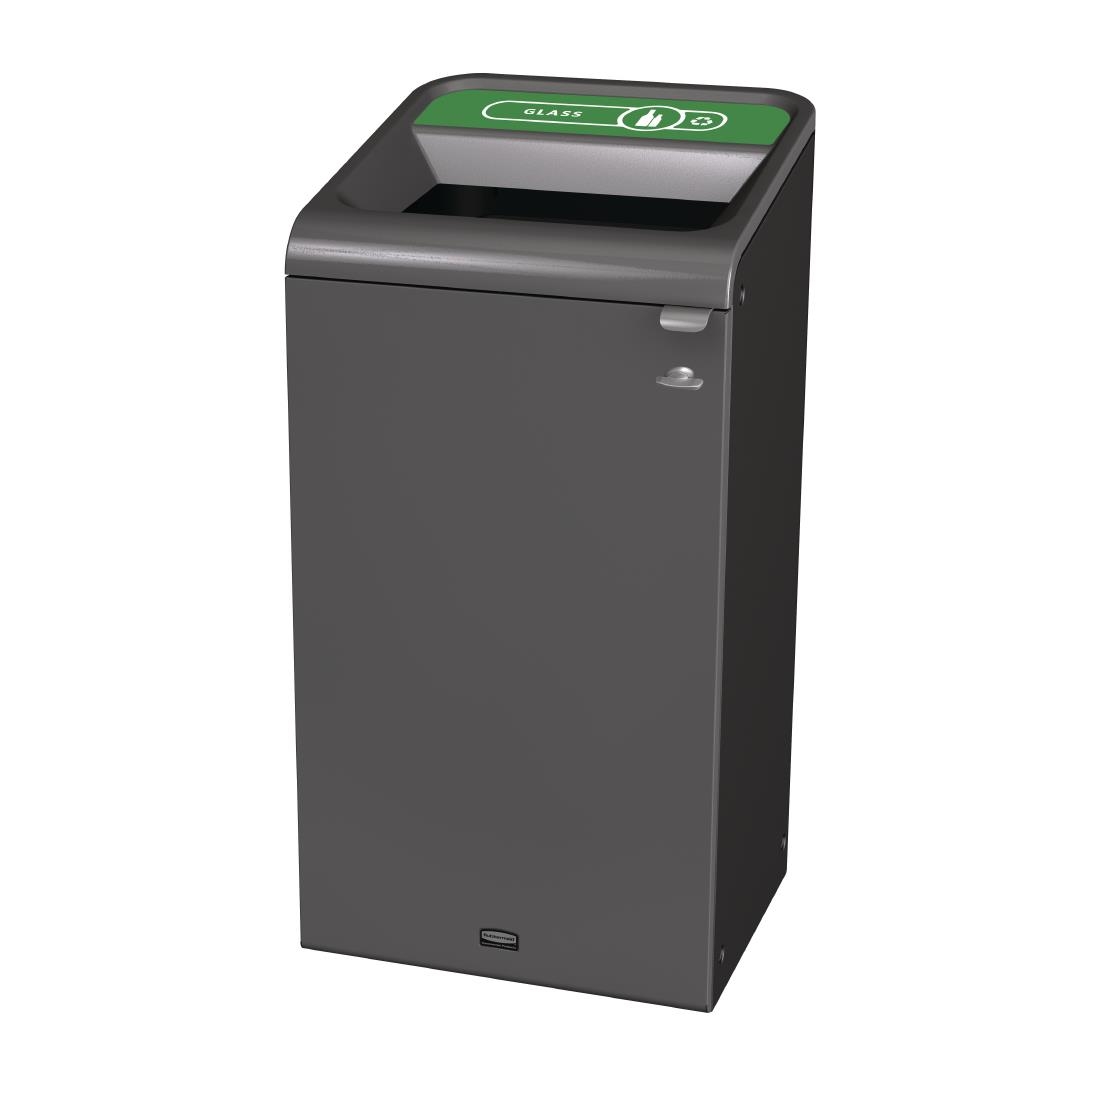 Rubbermaid Configure Recycling Bin with Glass Recycling Label Green 87Ltr (CX967)